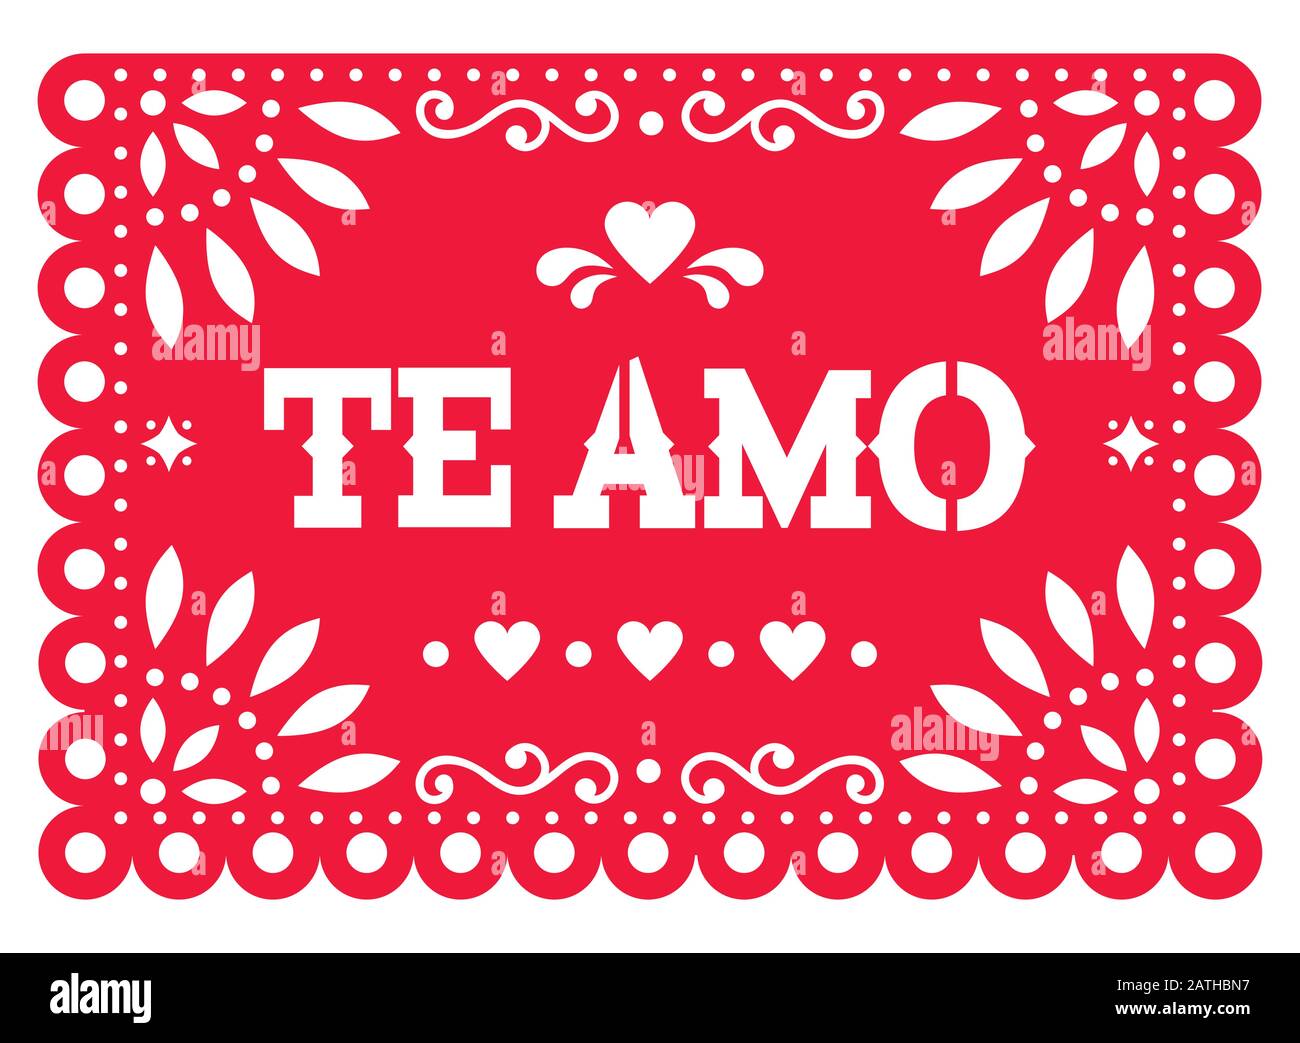 Papel Picado vector design for Valentine's Day, red Te amo (I love you in Spanish) Mexican paper cut out decoration with flowers and geometric shapes Stock Vector